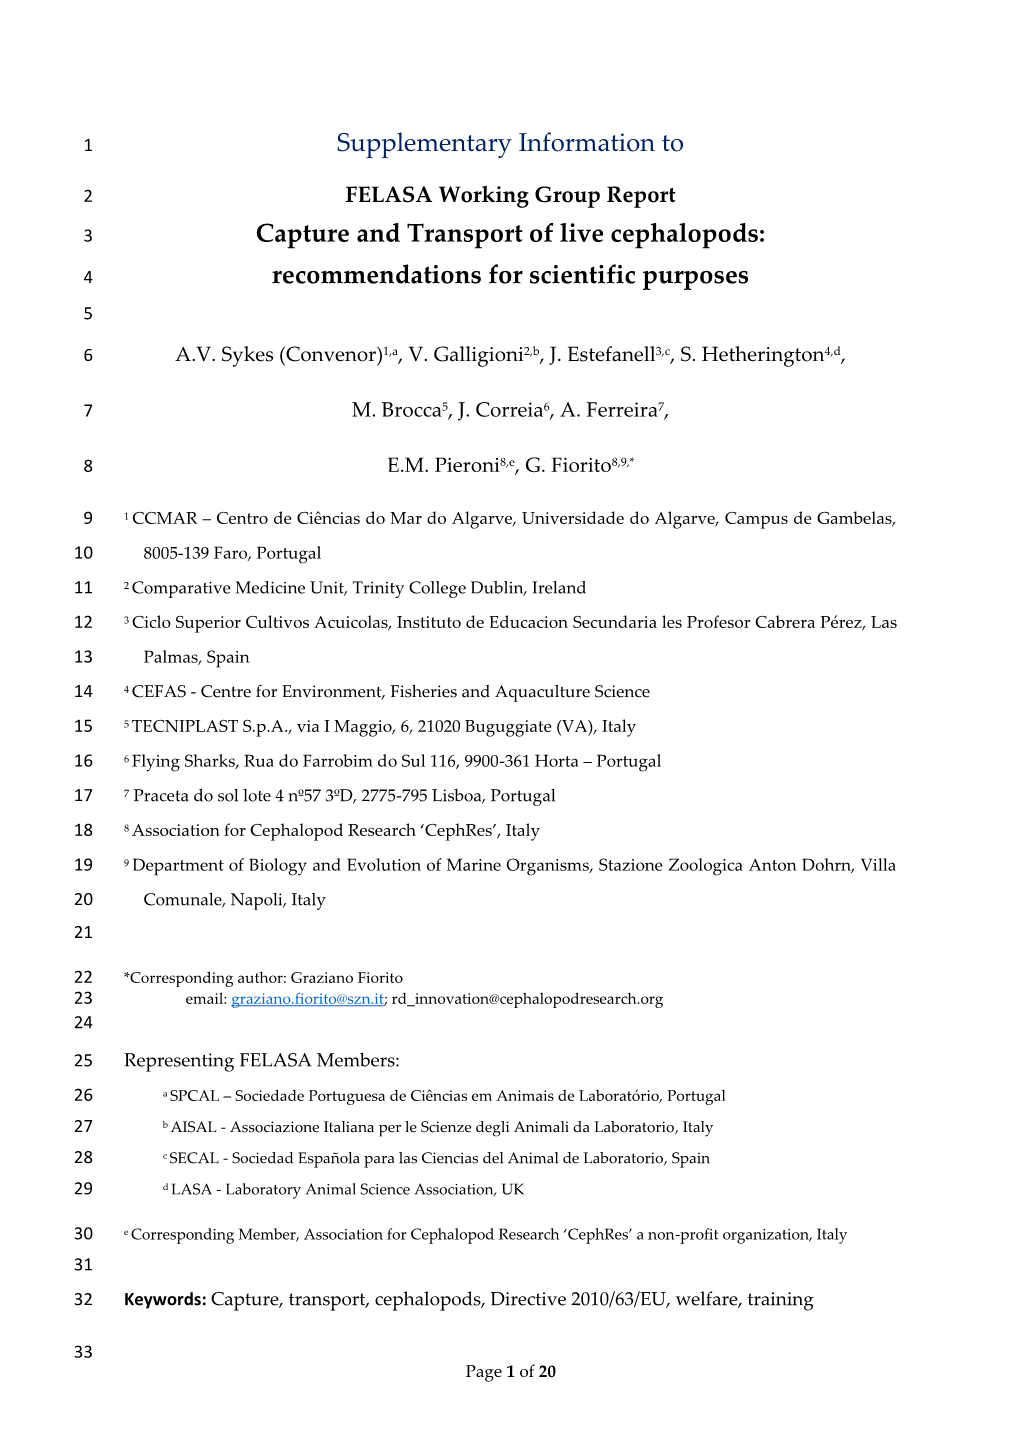 Supplementary Information to Capture and Transport of Live Cephalopods